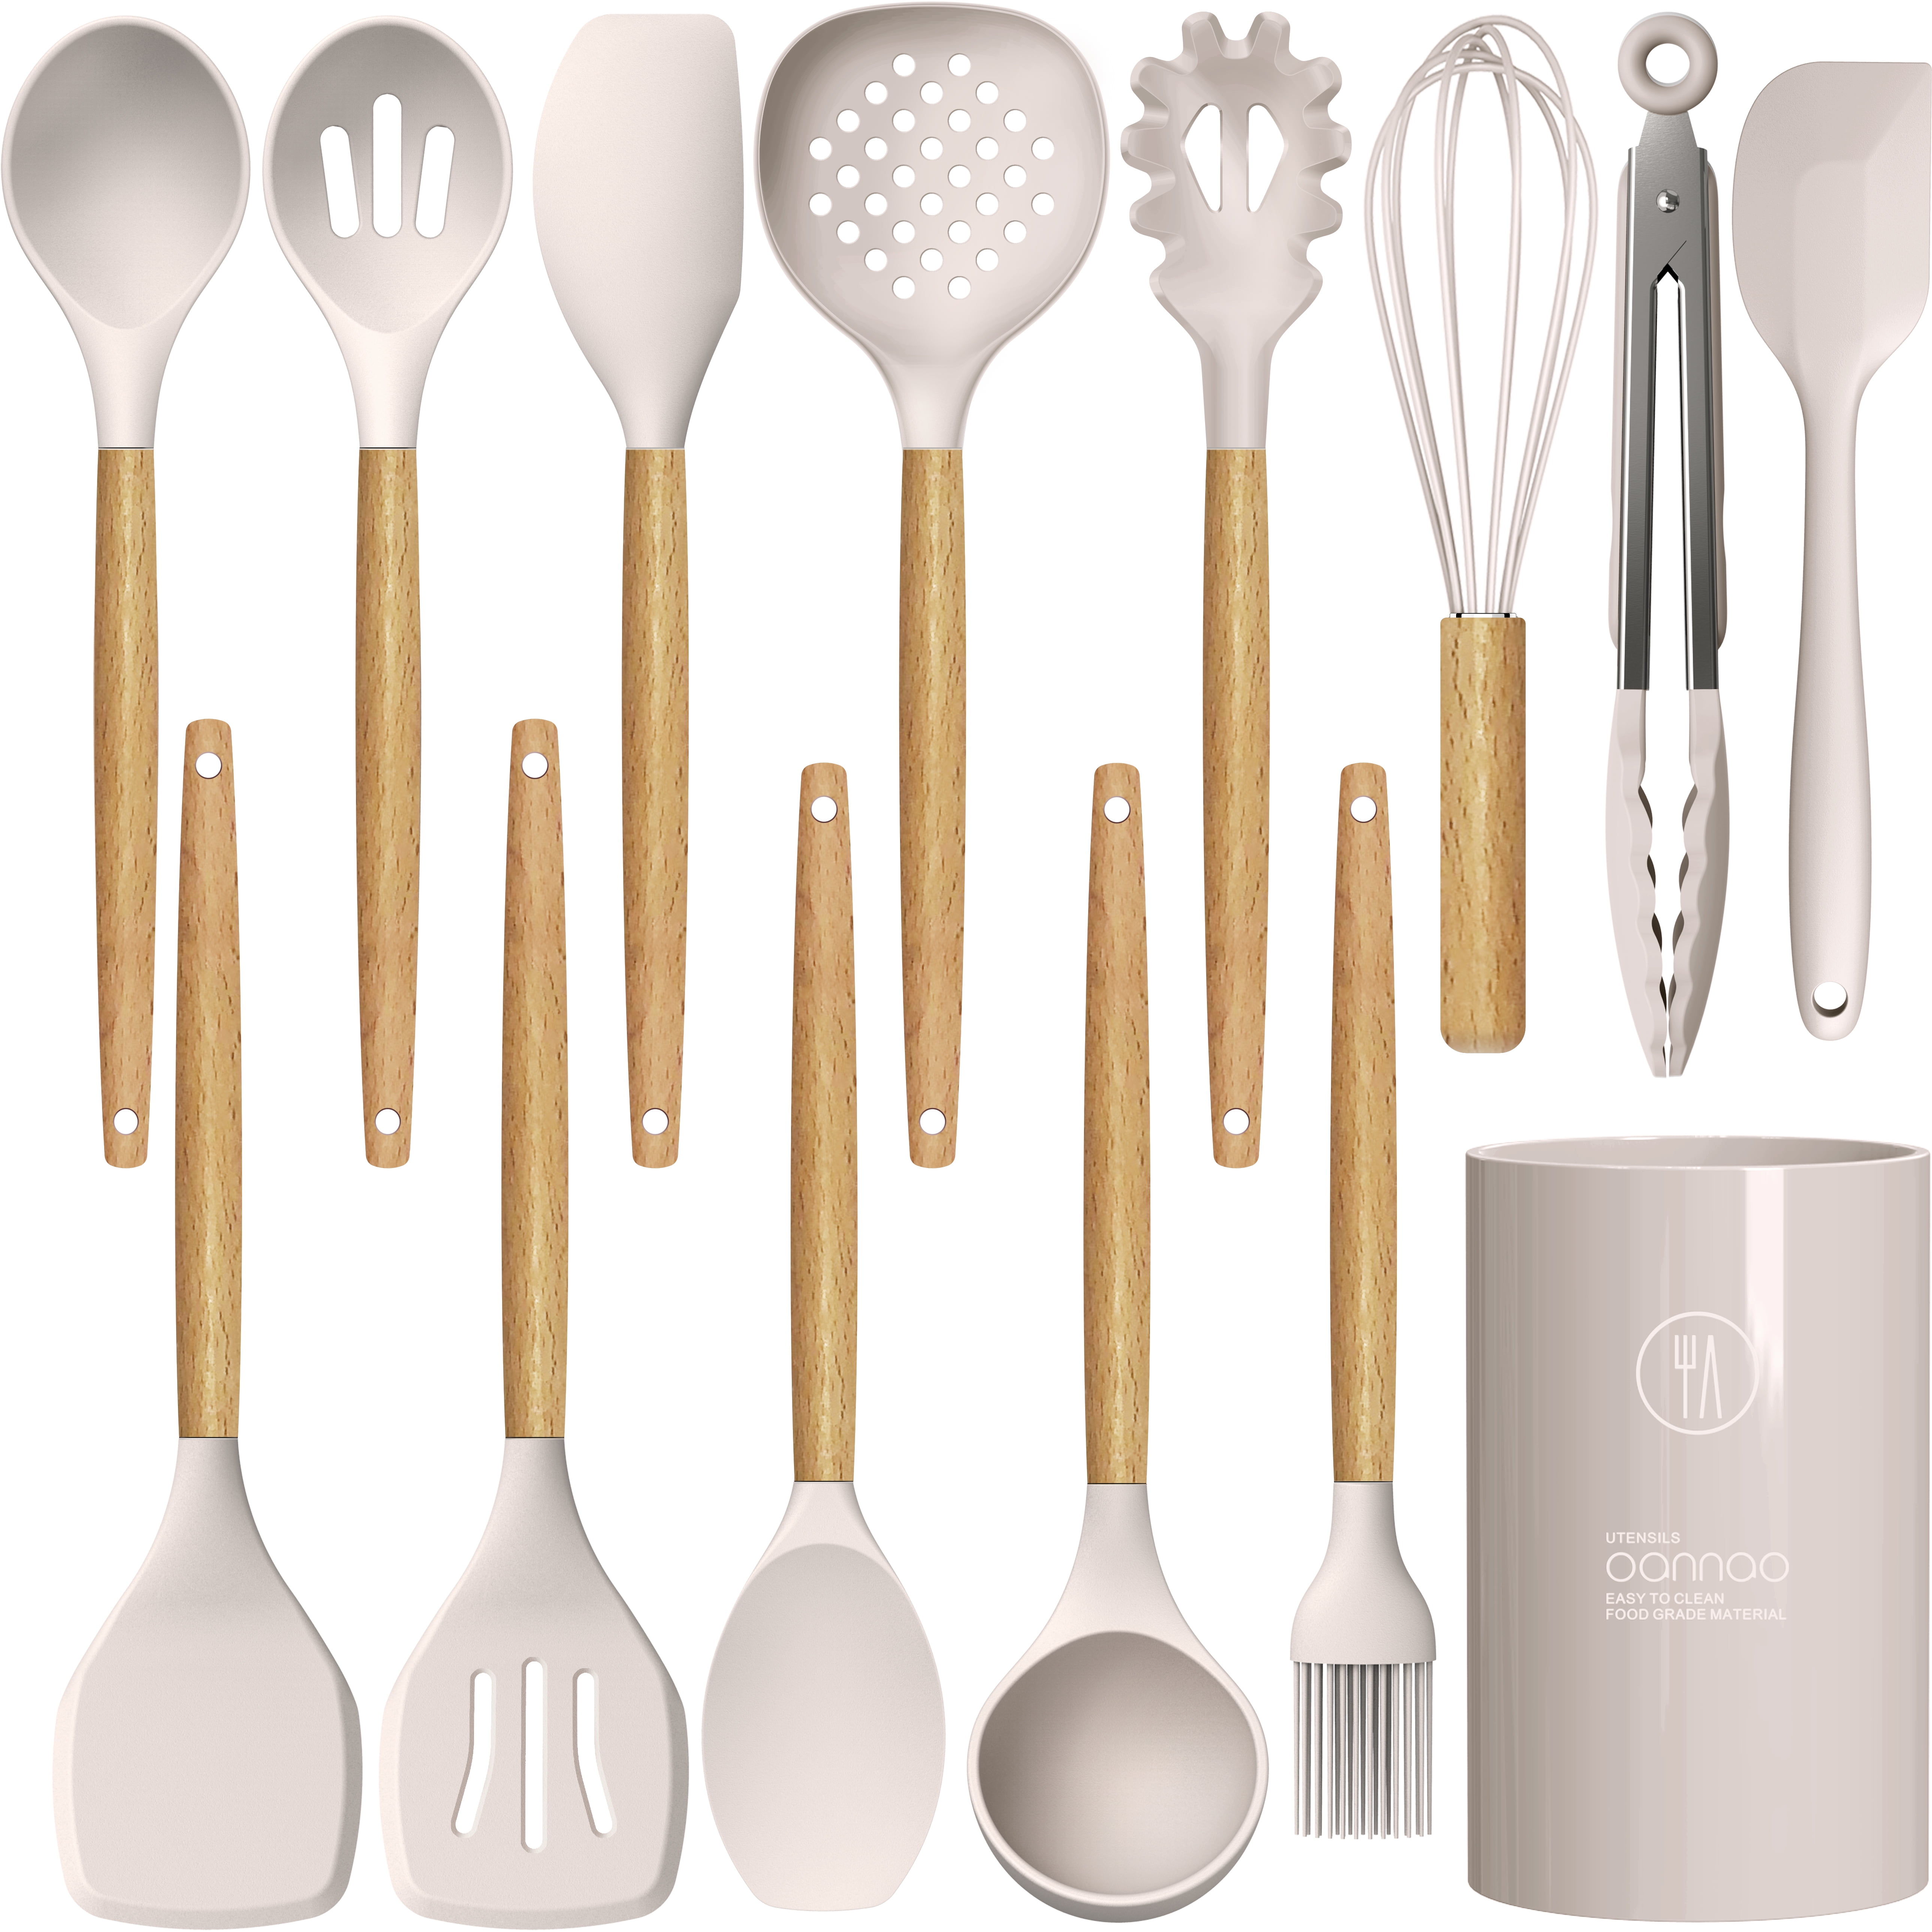 oannao Silicone Cooking Utensils Set - 446°F Heat Resistant Silicone Kitchen Utensils for Cooking,Kitchen Utensil Spatula Set w Wooden Handles,Holder, BPA FREE Gadgets for Non-Stick Cookware (Khaki)